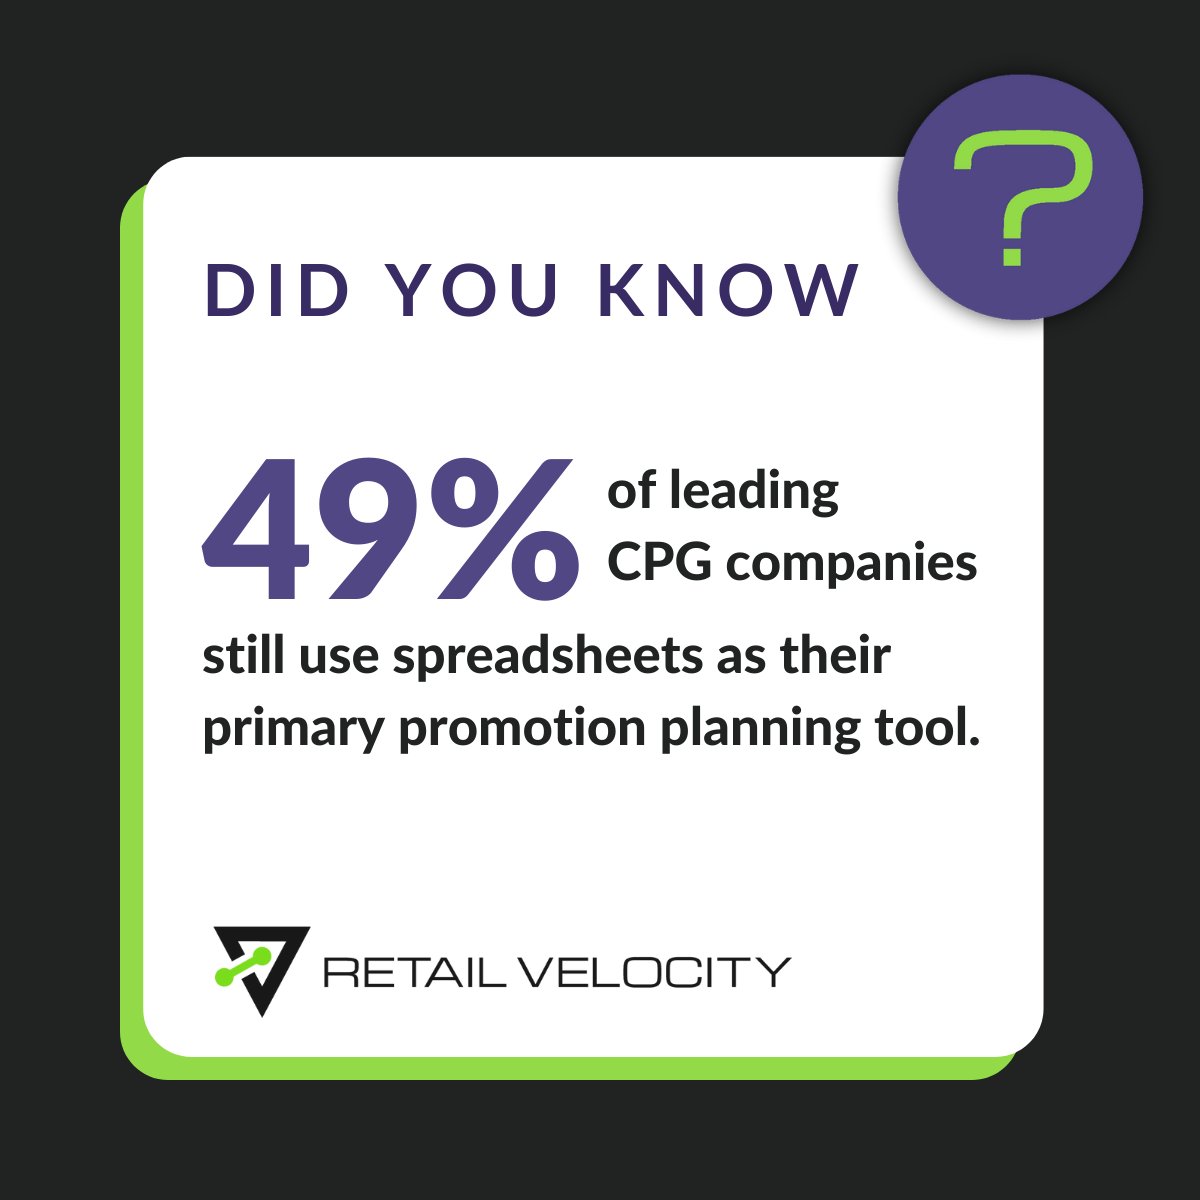 Spreadsheets have their place in the business world—using them for #tradepromotion planning and post-performance analysis shouldn’t be one. CPGs need reliable #retaildata and analytics to effectively plan, track, and measure their promotional efforts. hubs.ly/Q01JLtXB0